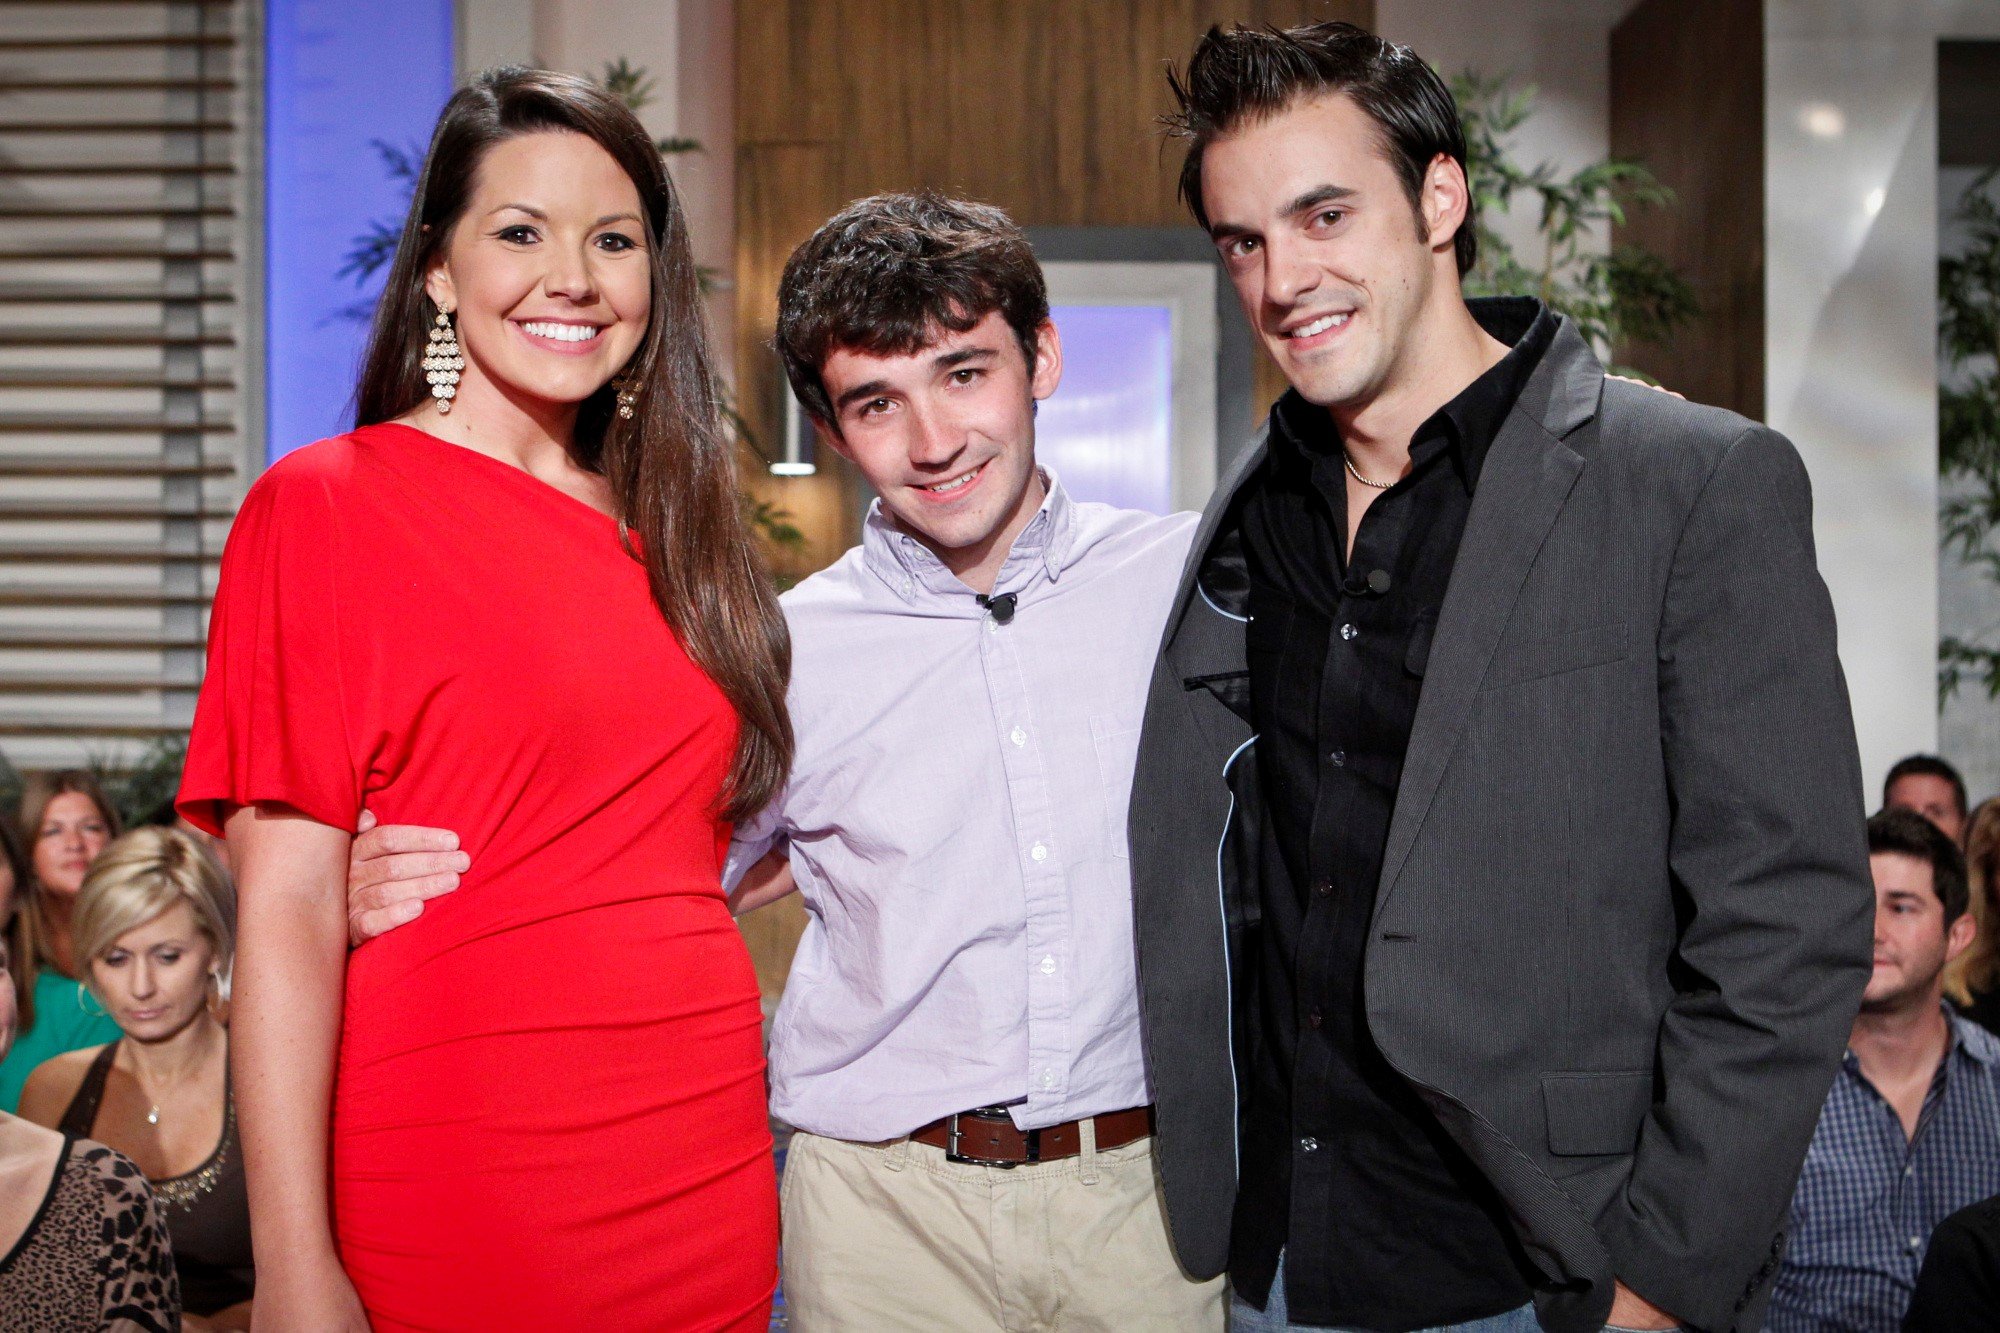 Danielle Murphree, Ian Terry, and Dan Gheesling, who starred in 'Big Brother 14' on CBS, pose for pictures at the finale. Danielle wears a red dress. Ian wears a light blue button-up shirt and khakis. Dan wears a dark gray suit over a black button-up shirt and jeans.